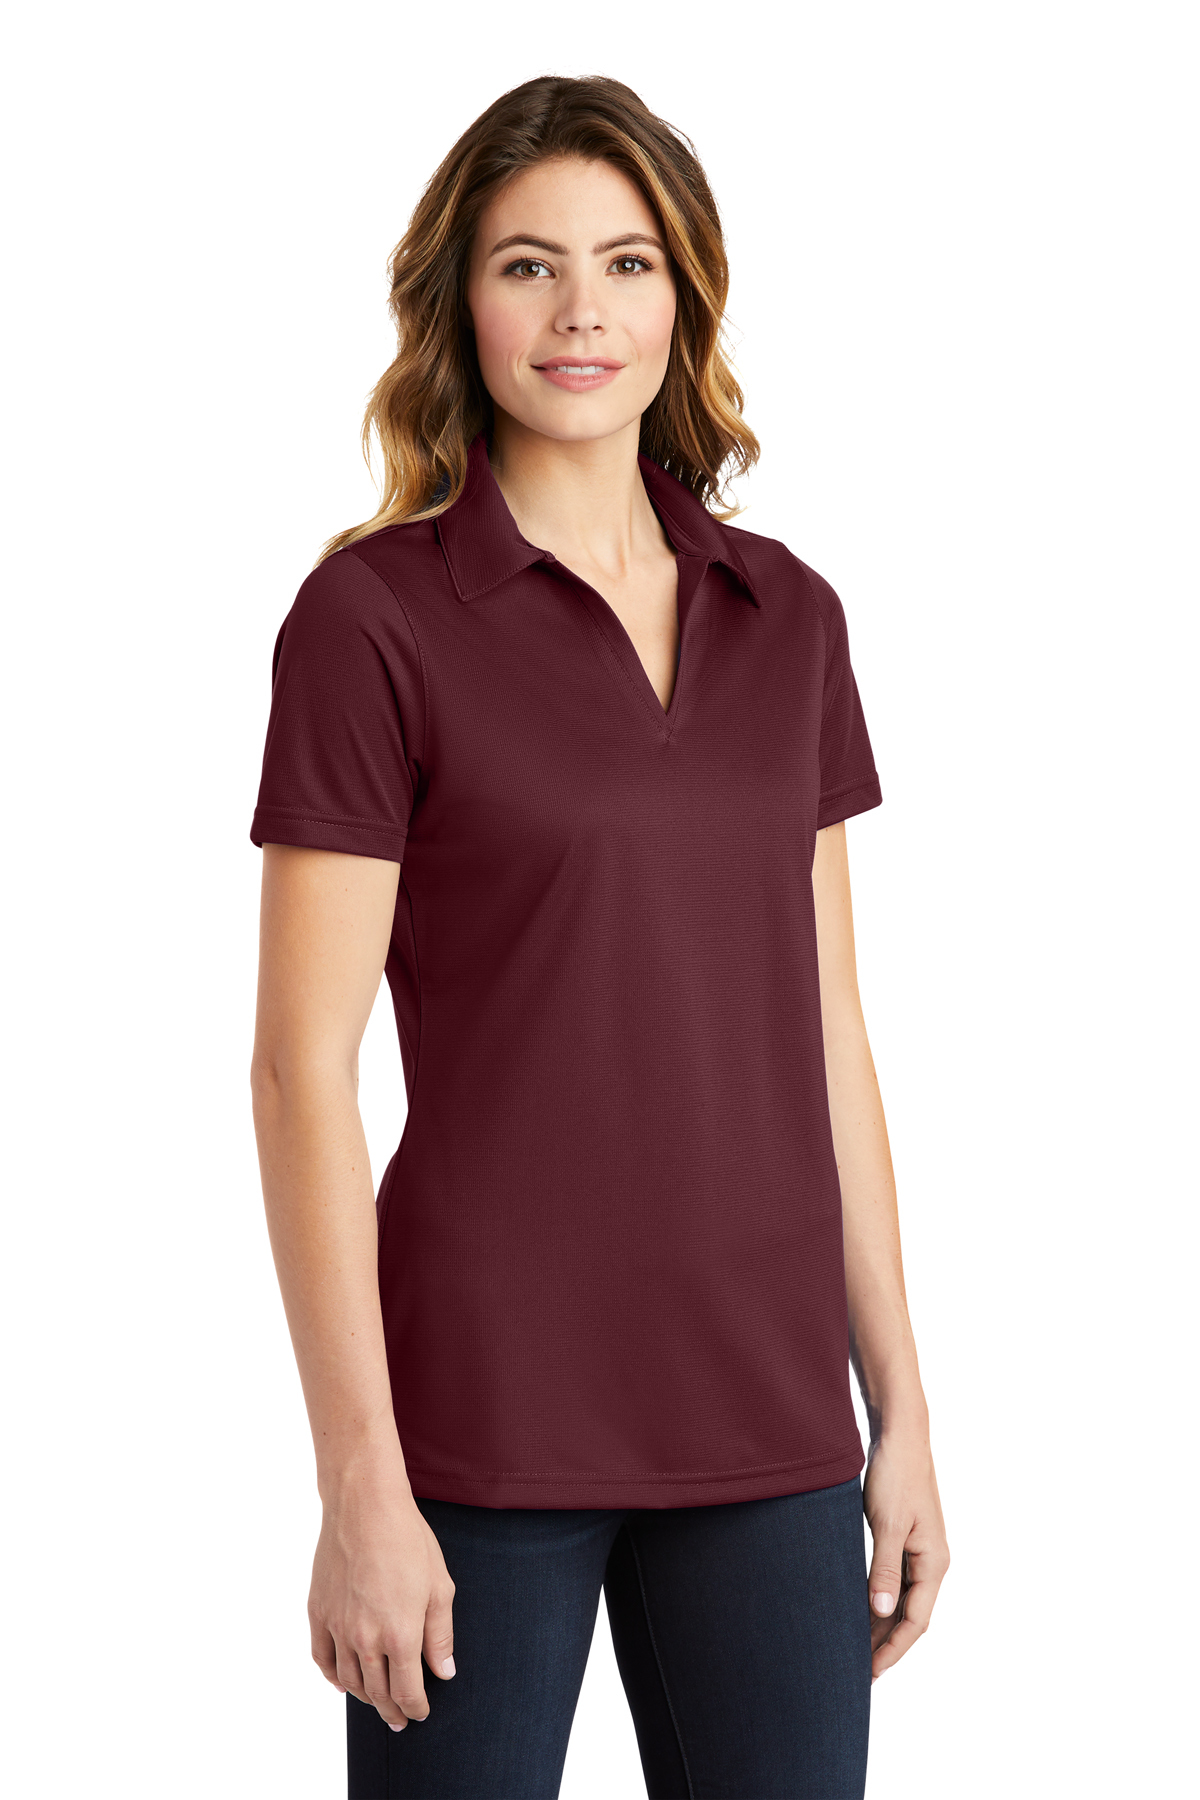 Sport-Tek Ladies PosiCharge Active Textured Polo | Product | Company ...